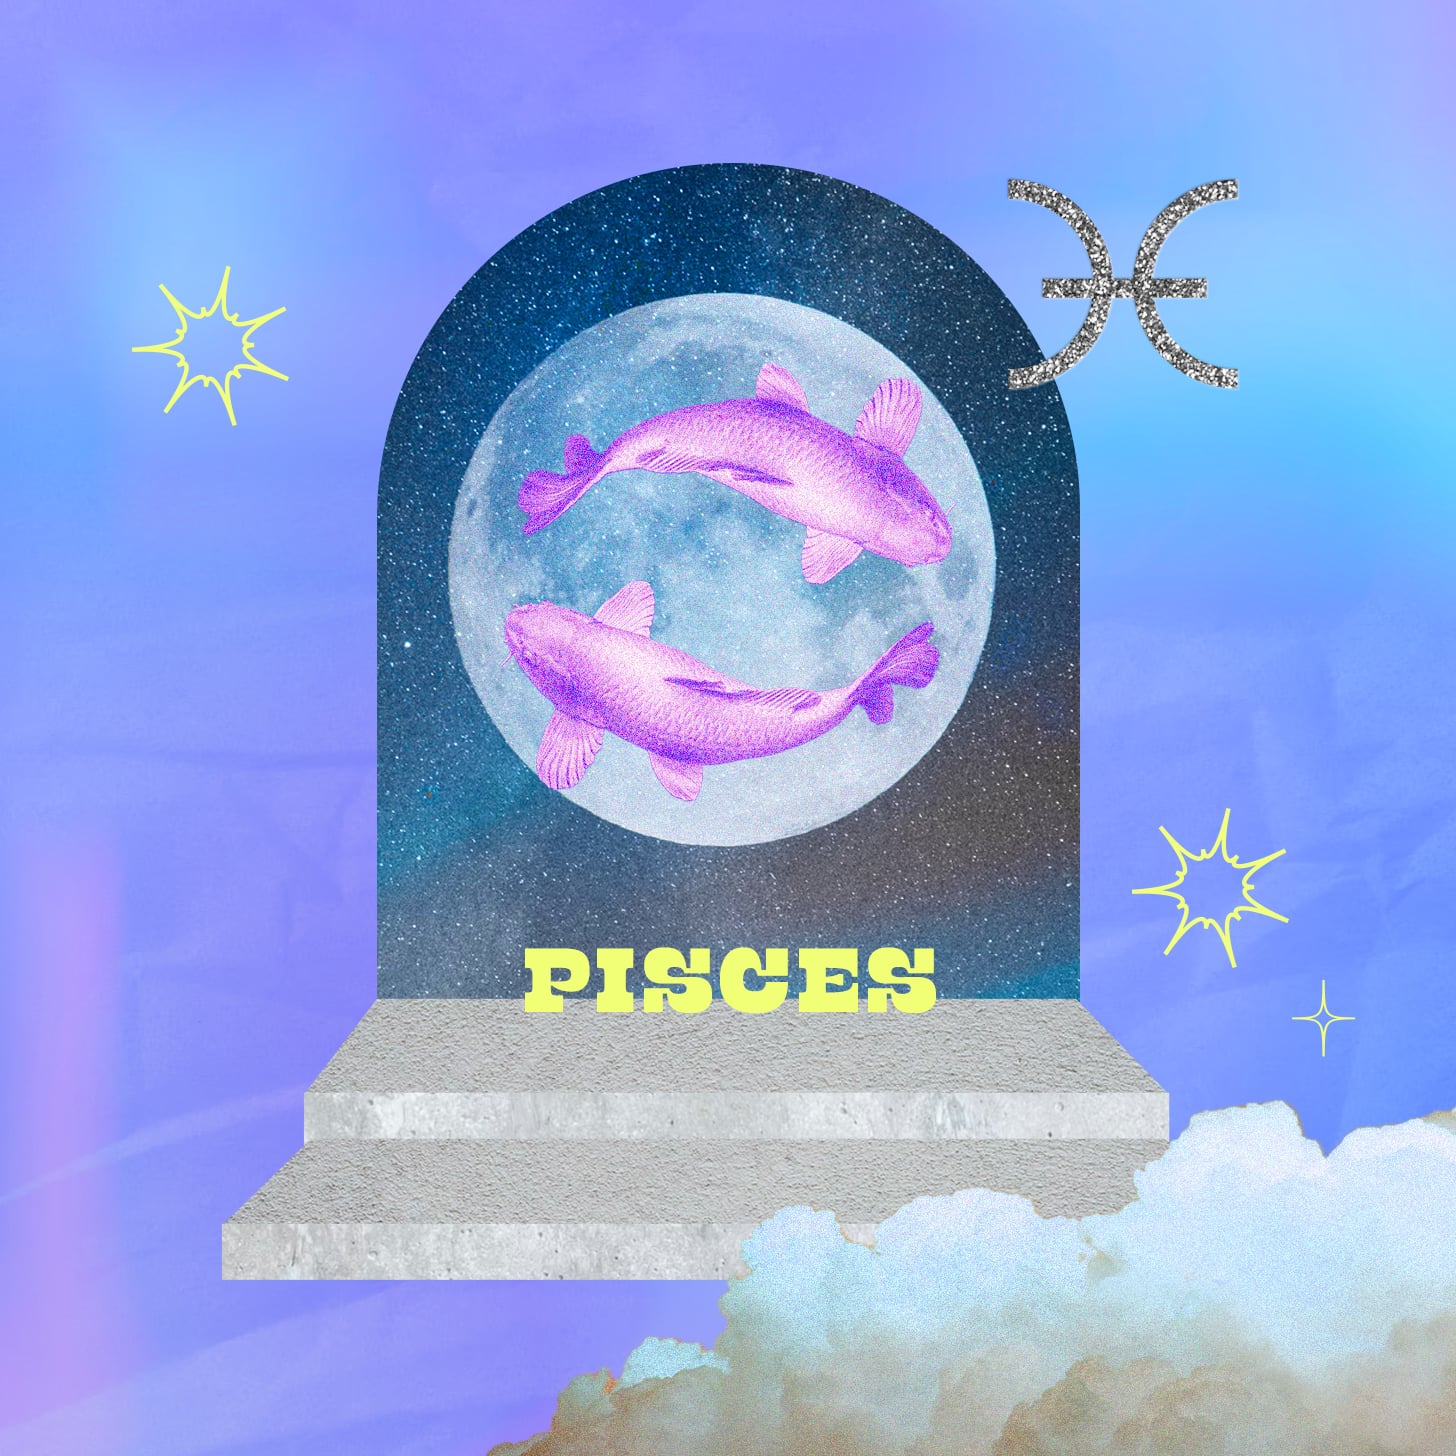 Pisces weekly horoscope for July 31, 2022